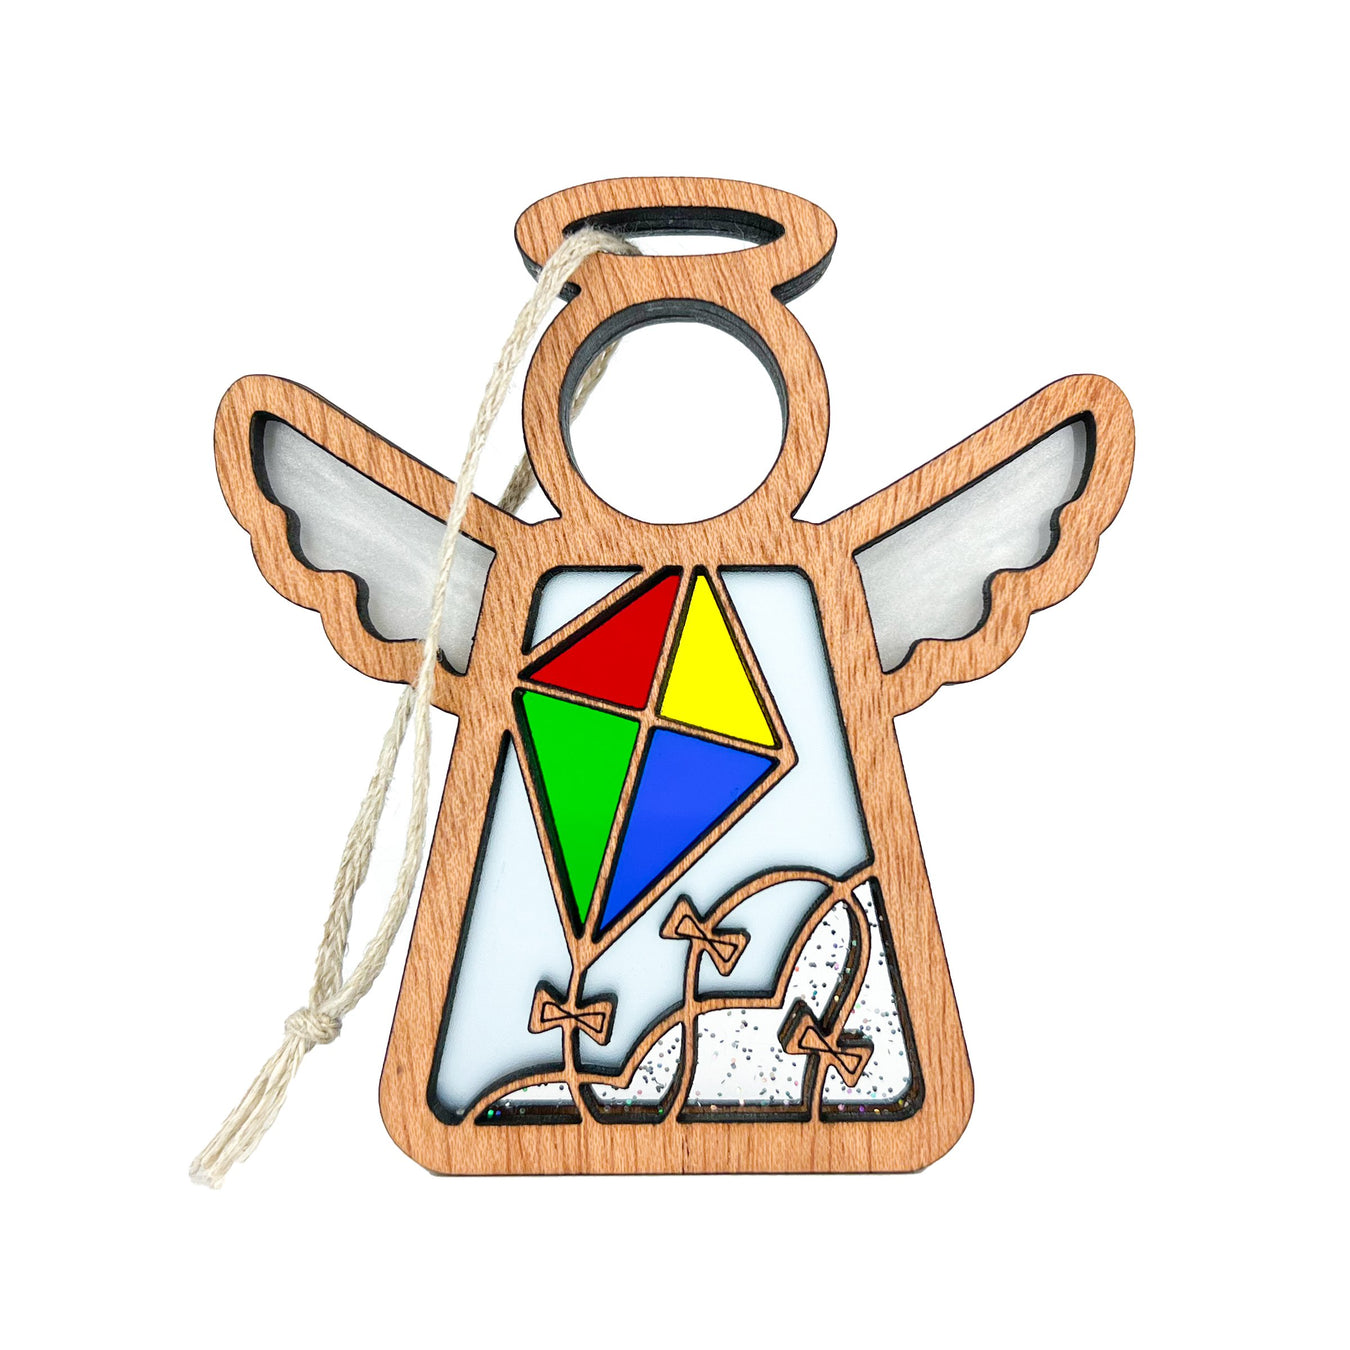 This Mother’s Angels® ornament, from Forged Flare's® Fly a Kite for Charity collection, showcases a stained-glass style kite. It supports Youth Villages in Memphis, Tennessee, reflecting our commitment to donate to charity and aid nonprofit organizations.